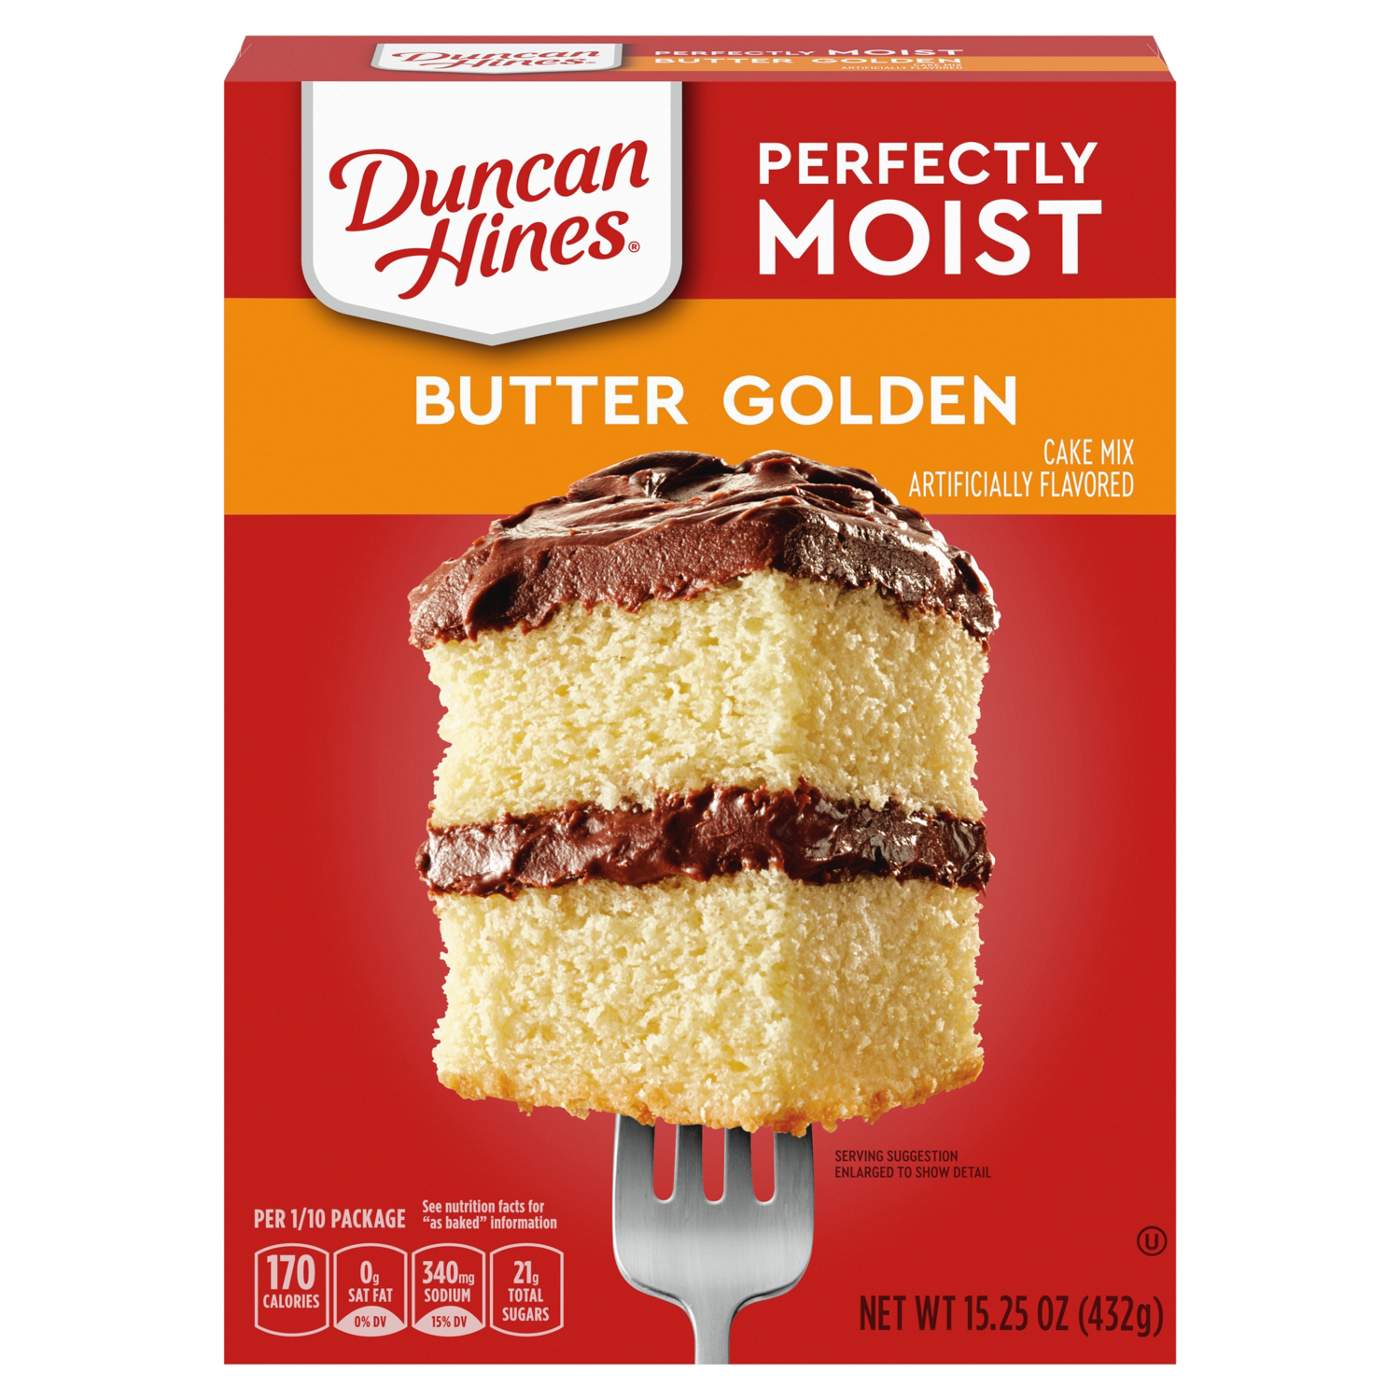 Duncan Hines Perfectly Moist Butter Golden Cake Mix; image 1 of 7